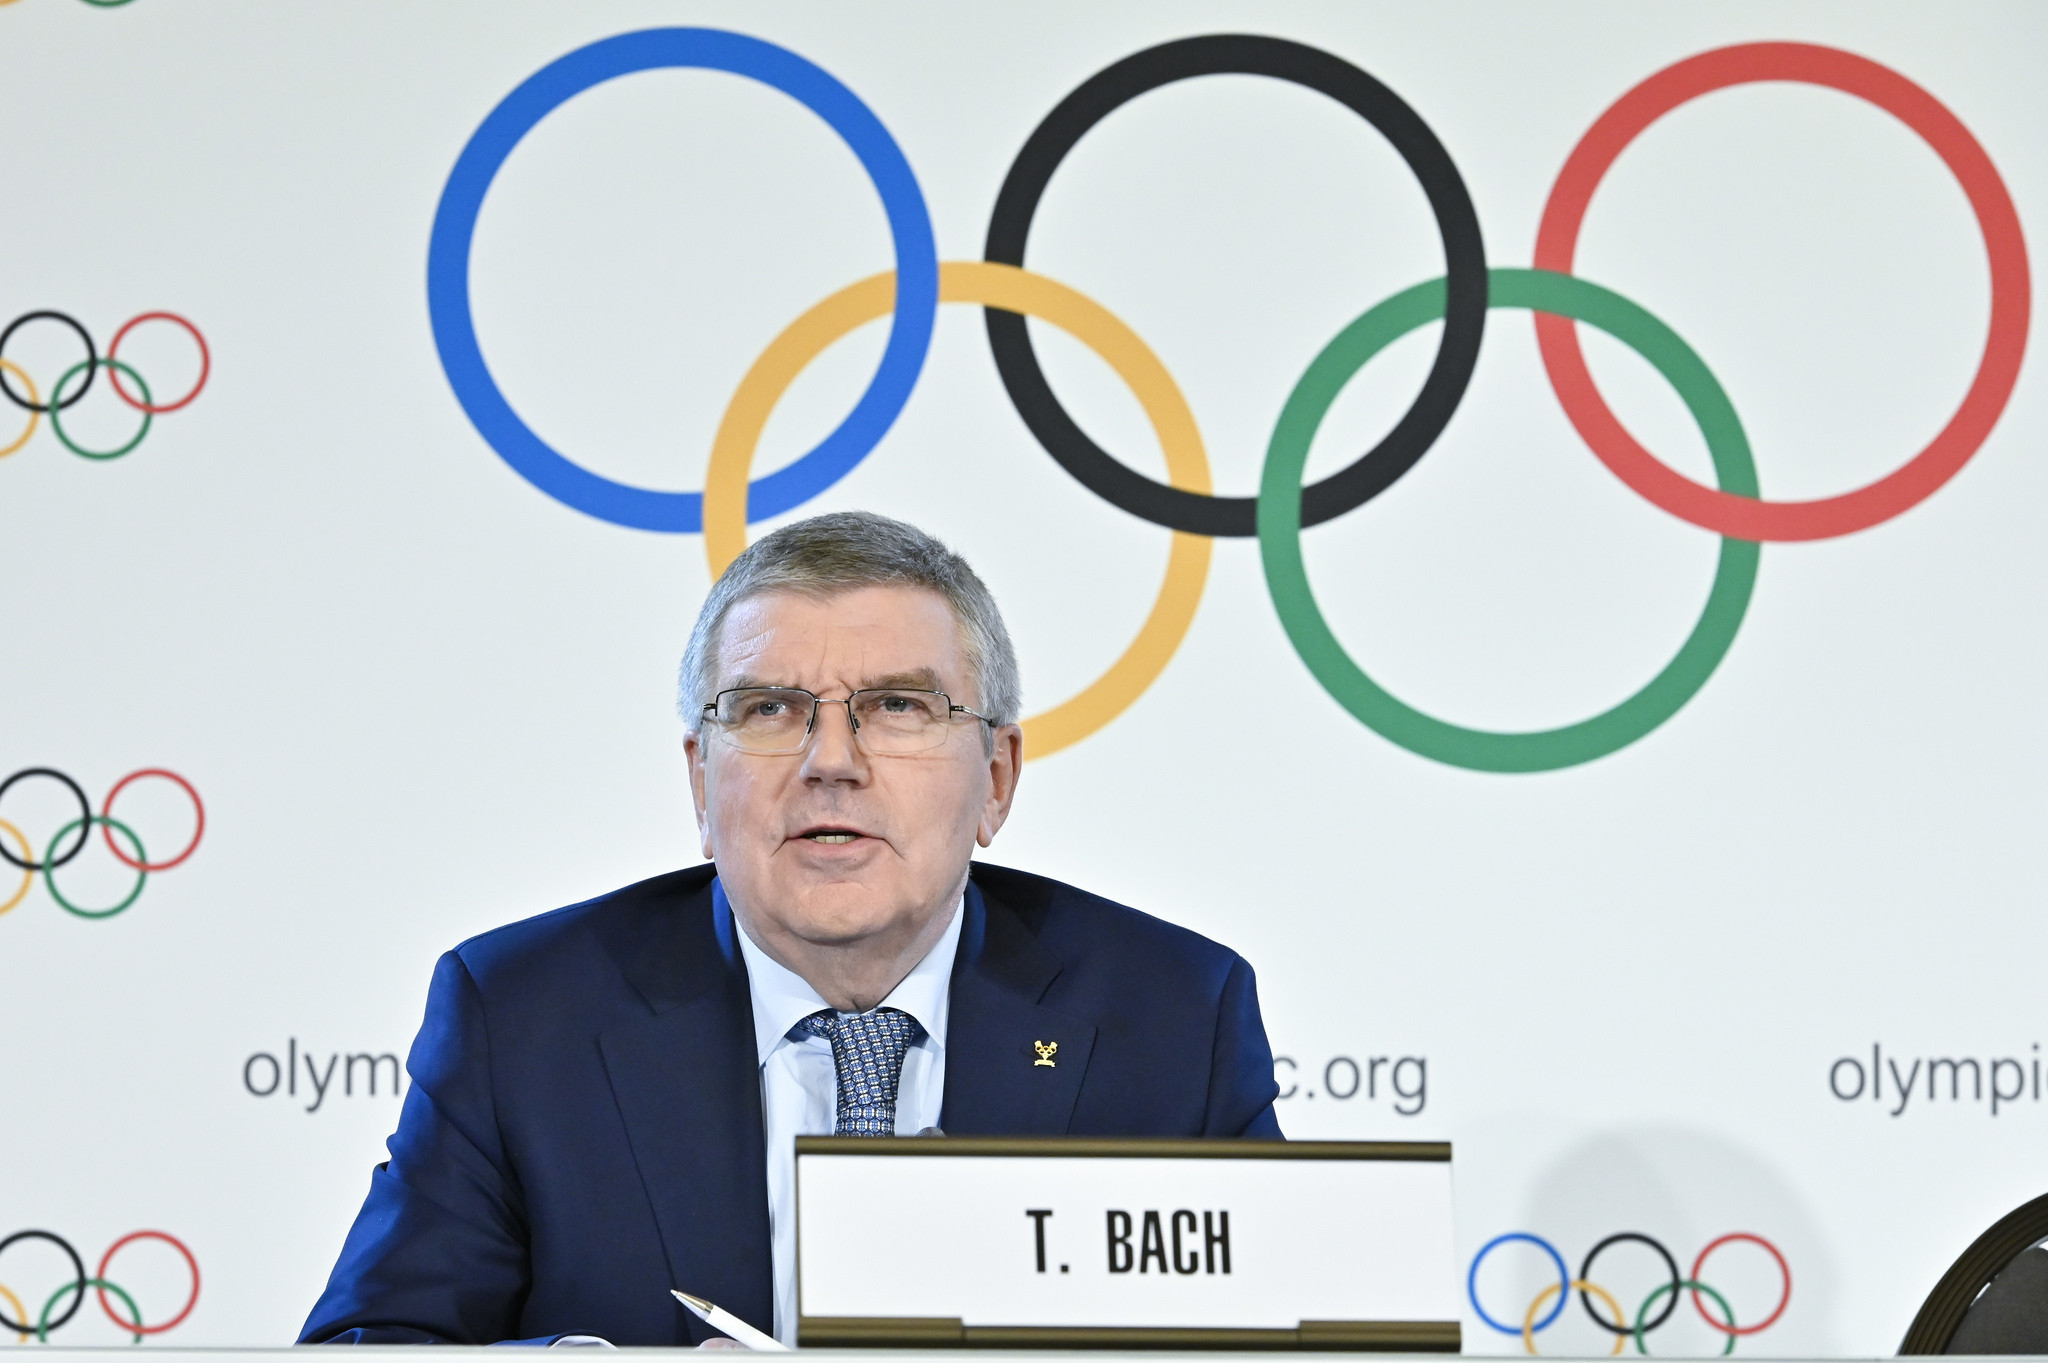 IOC President Thomas Bach insisted the organisation would not move towards a selection, rather than an election, process when deciding the host of the Olympic Games ©Getty Images